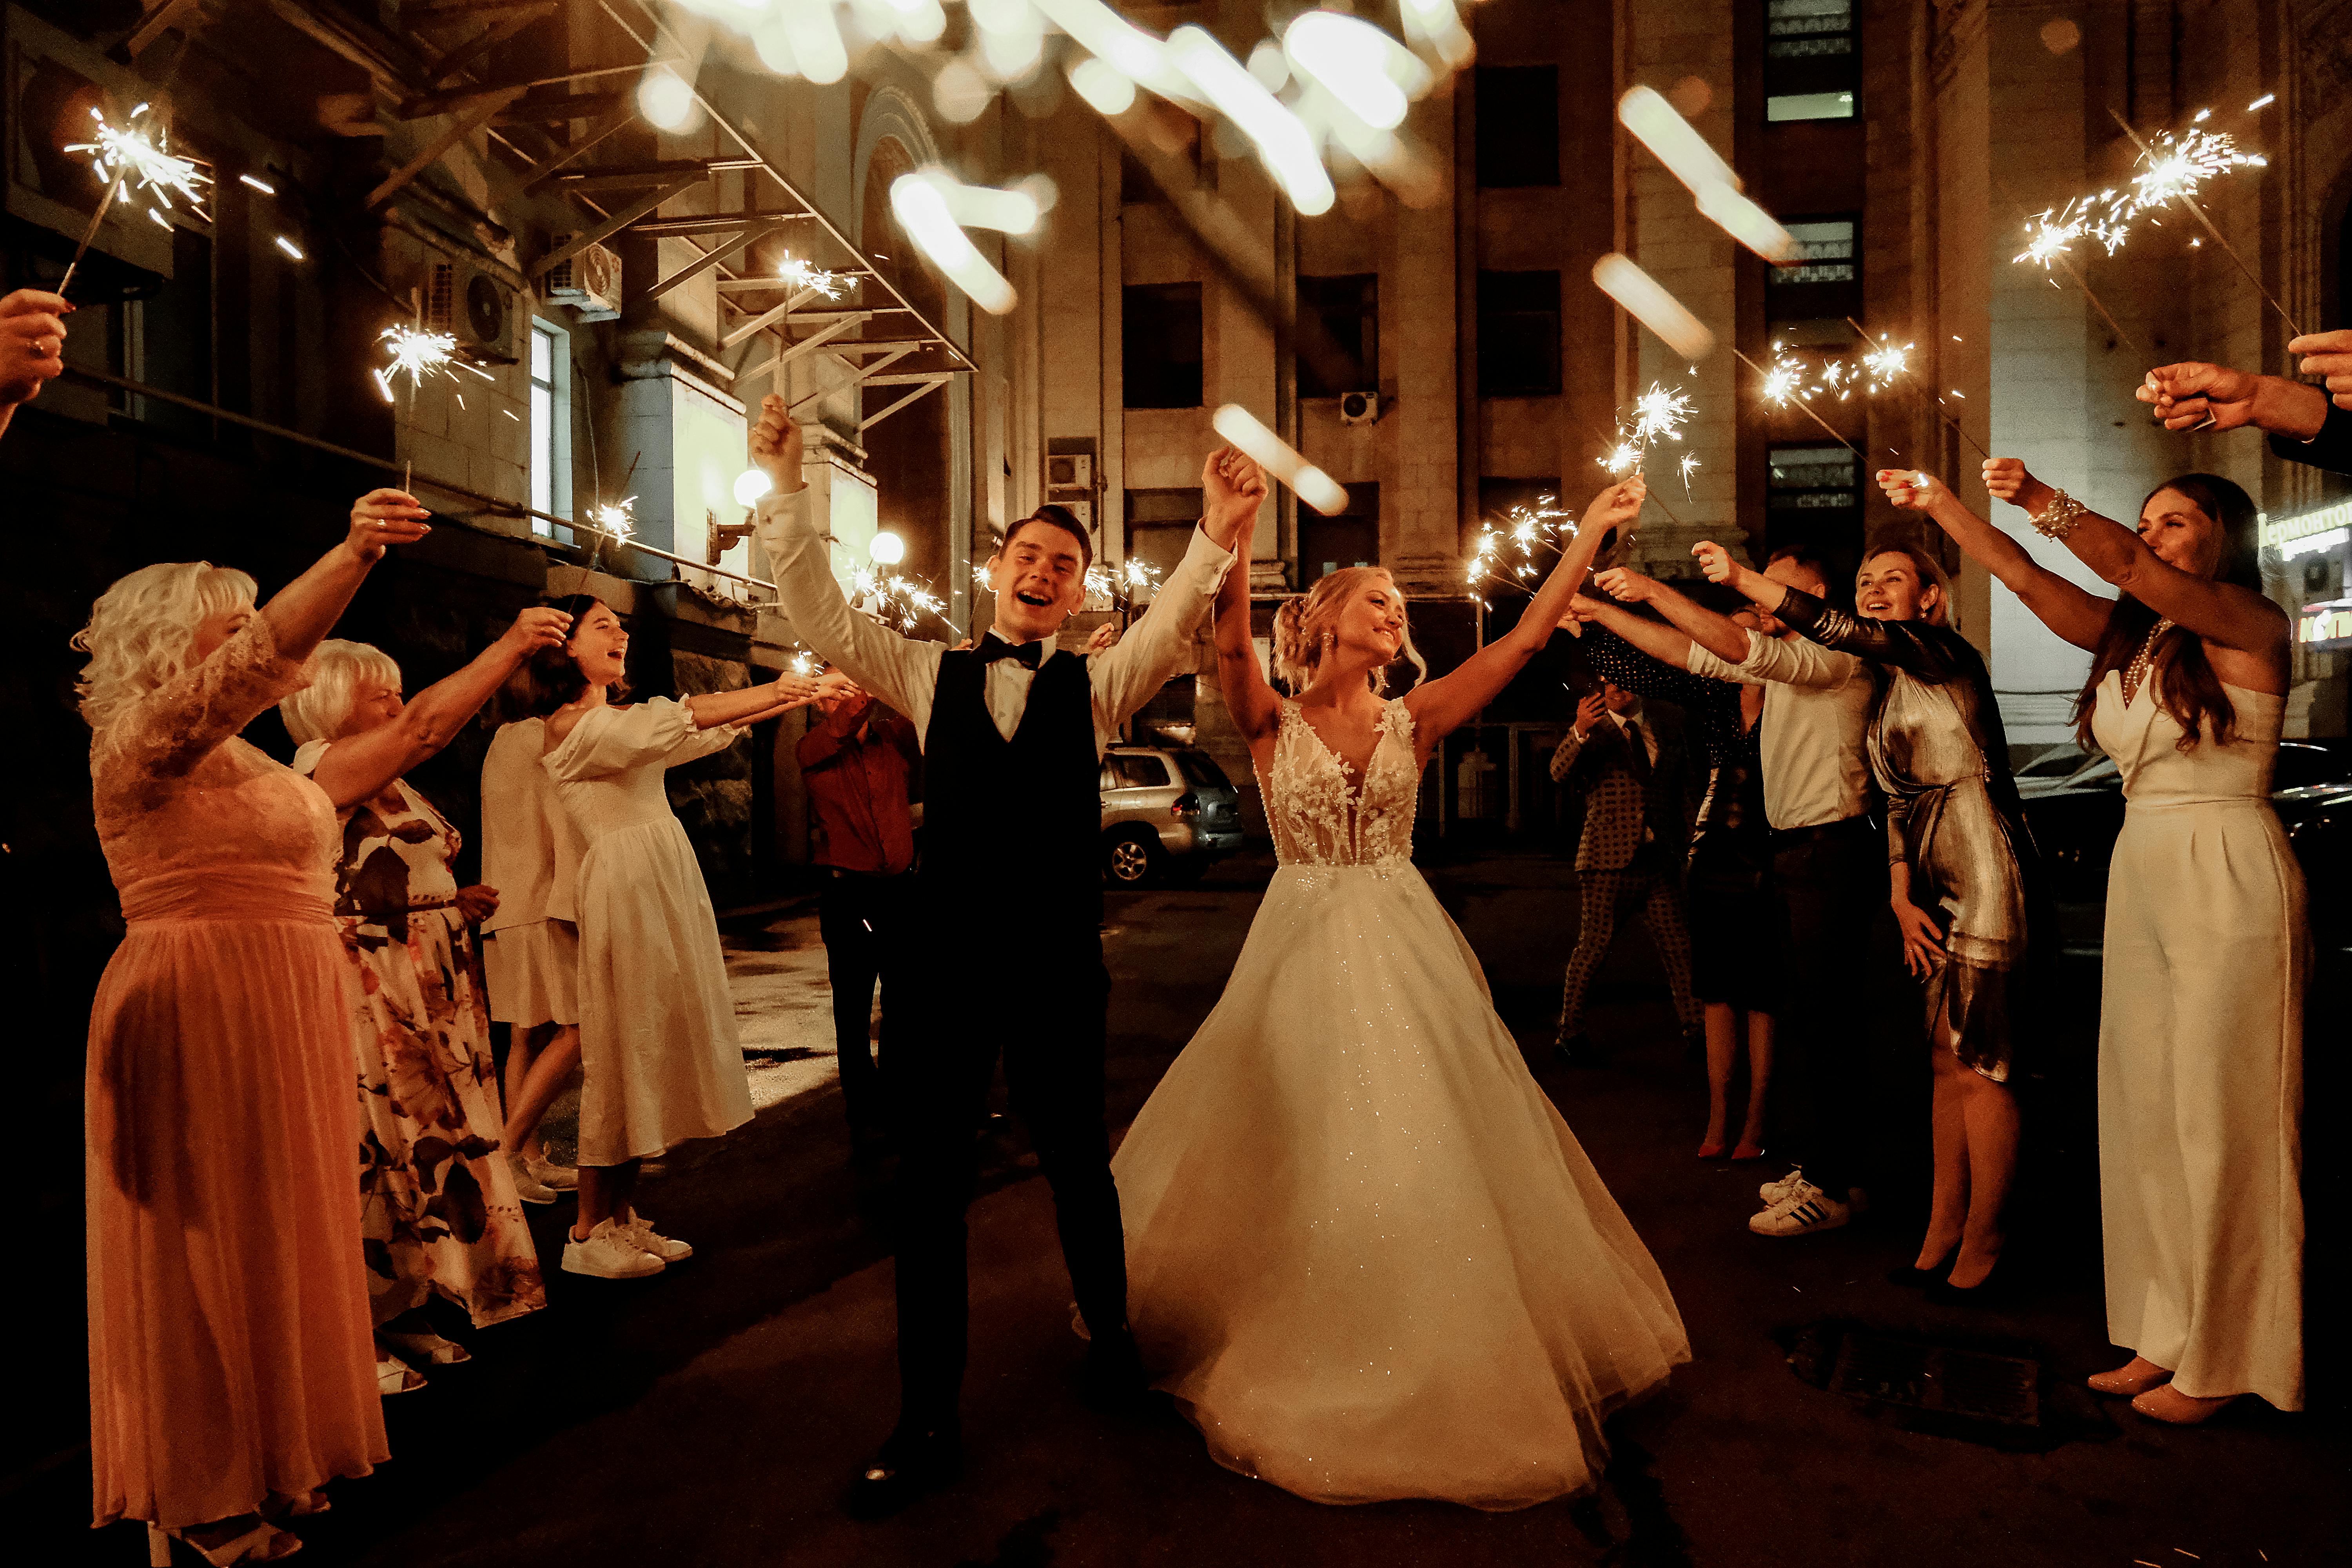 Wedding guests celebrating the bride and groom | Source: Pexels